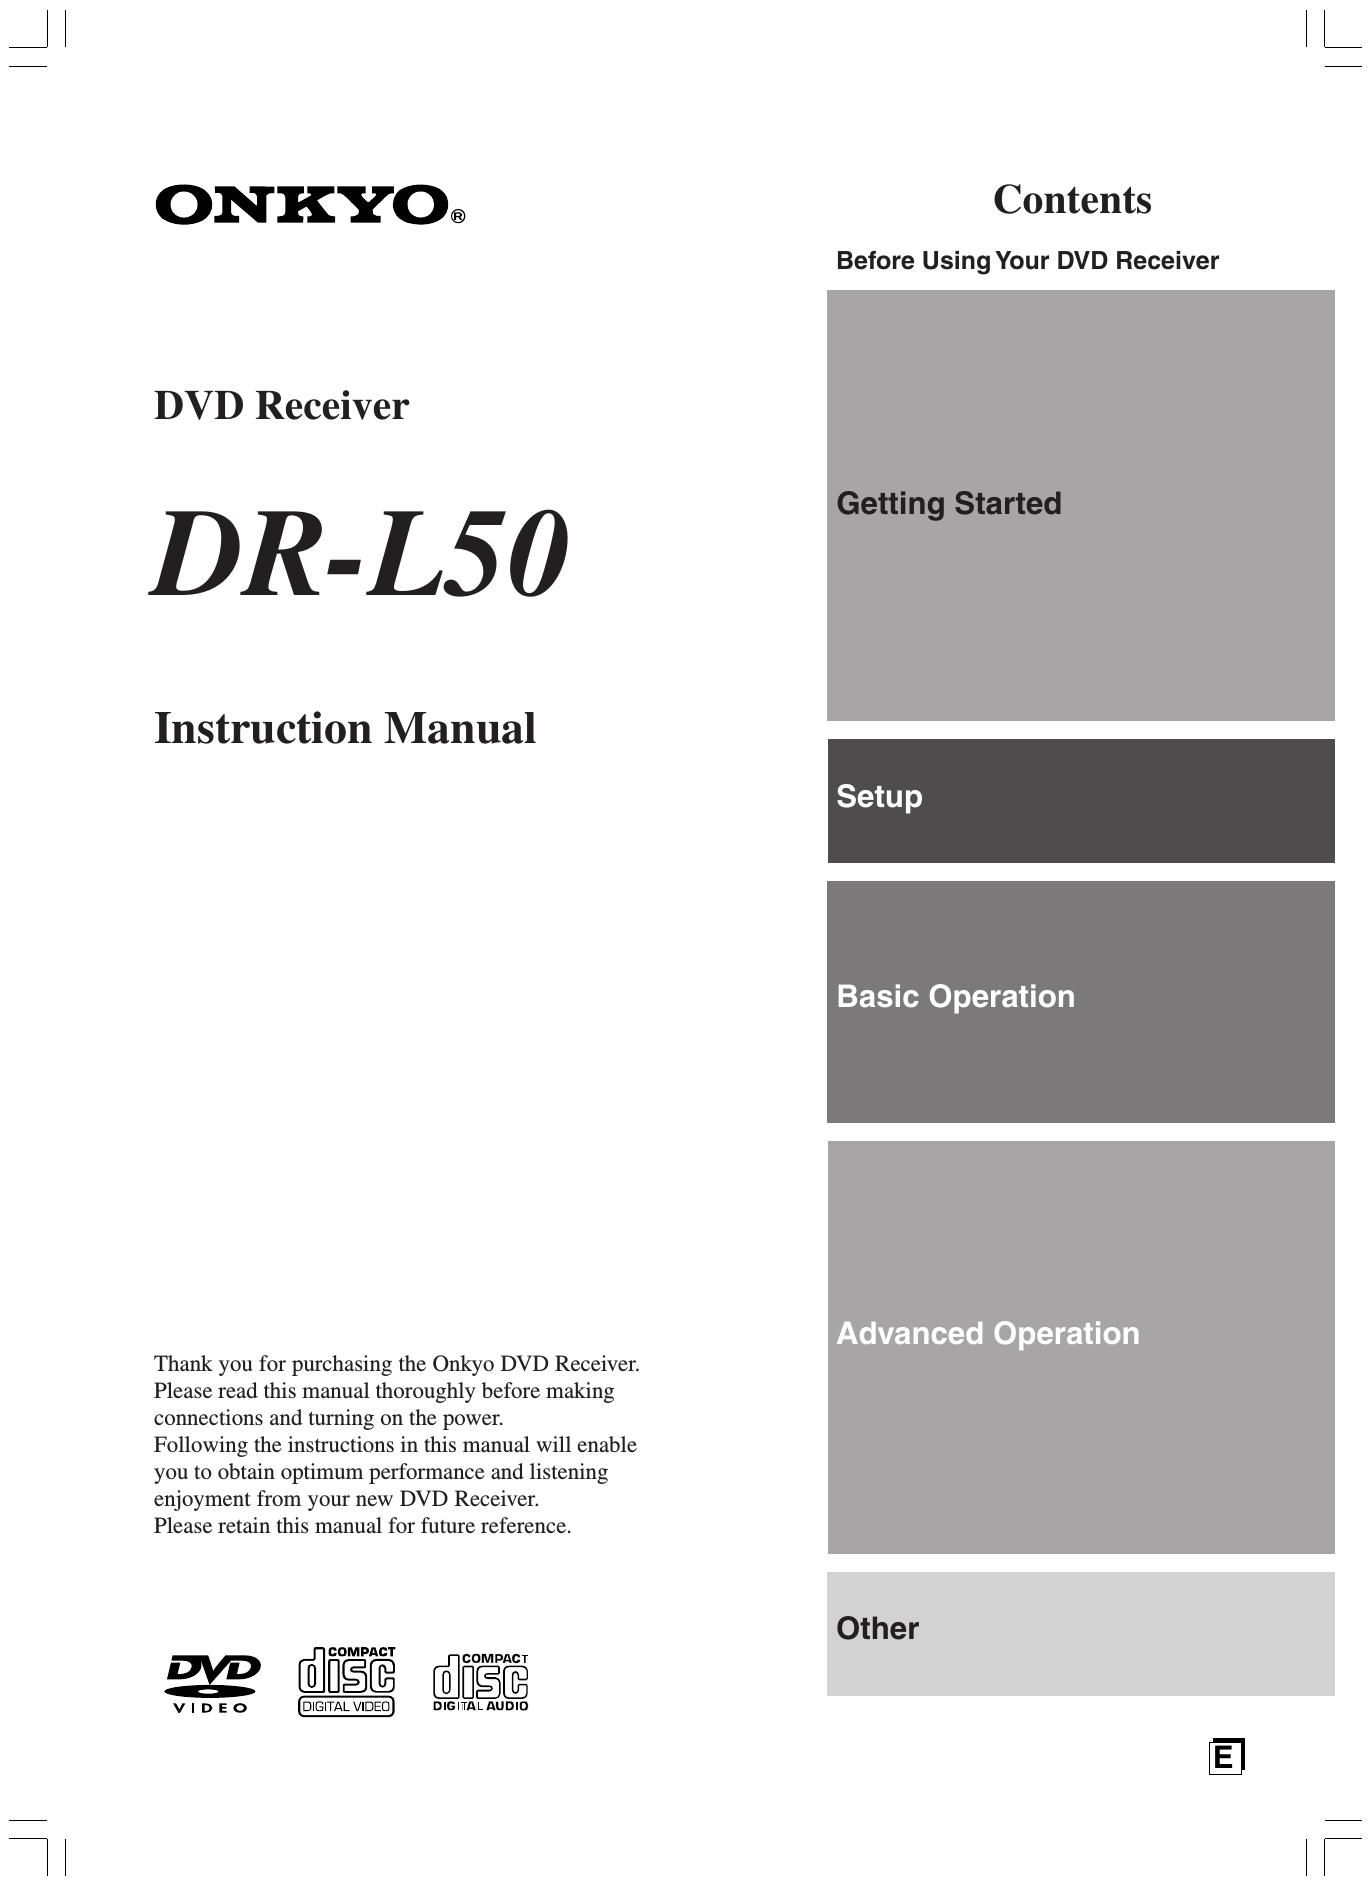 Onkyo DRL 50 Owners Manual